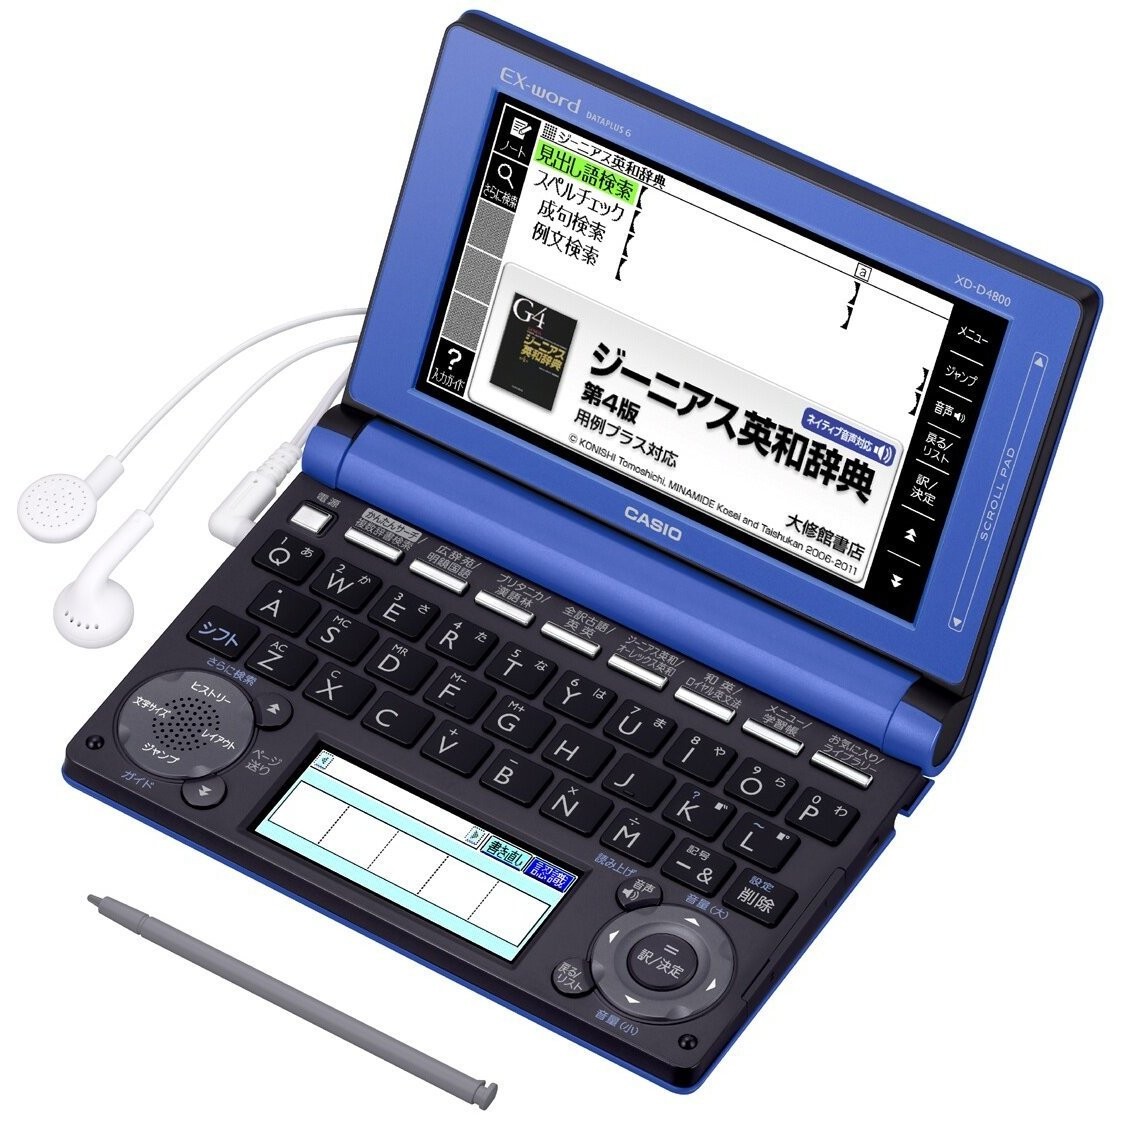 CASIO EX-word XD-D4800BU Japanese English Electronic Dictionary